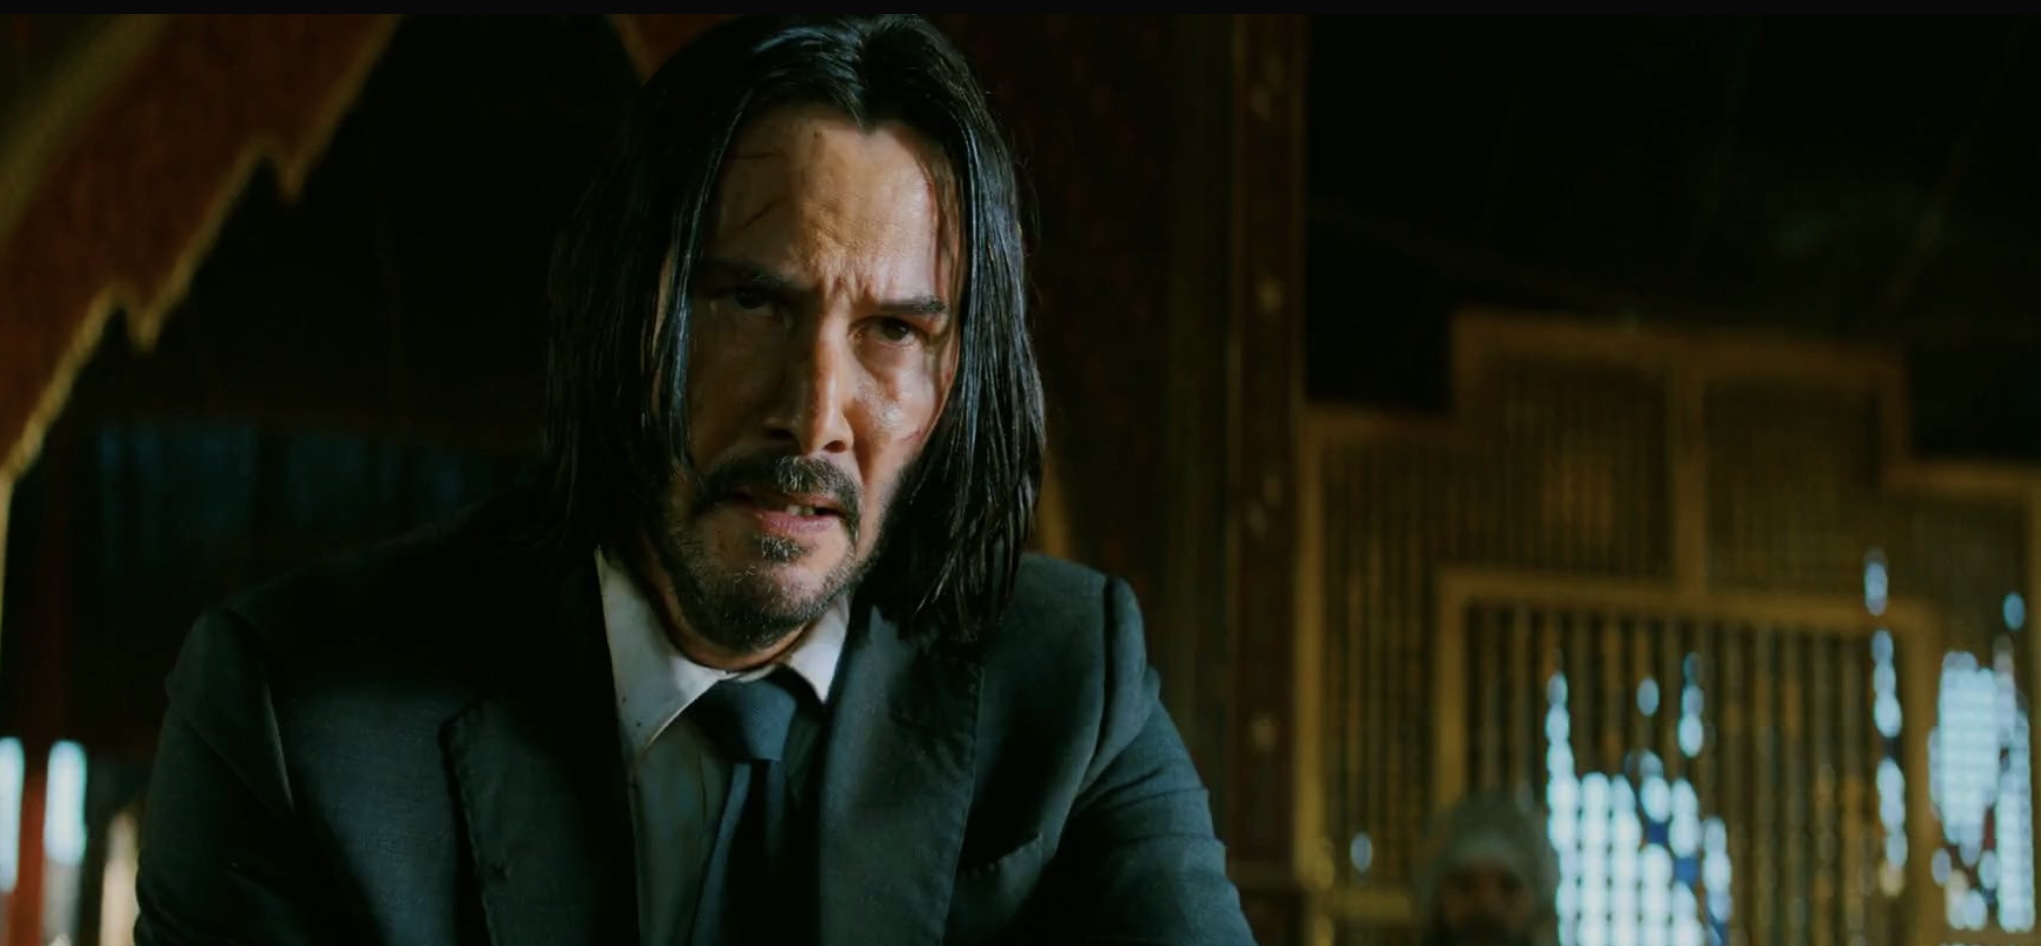 John Wick: Chapter 3 – Parabellum is now the #1 movie streaming in Canada